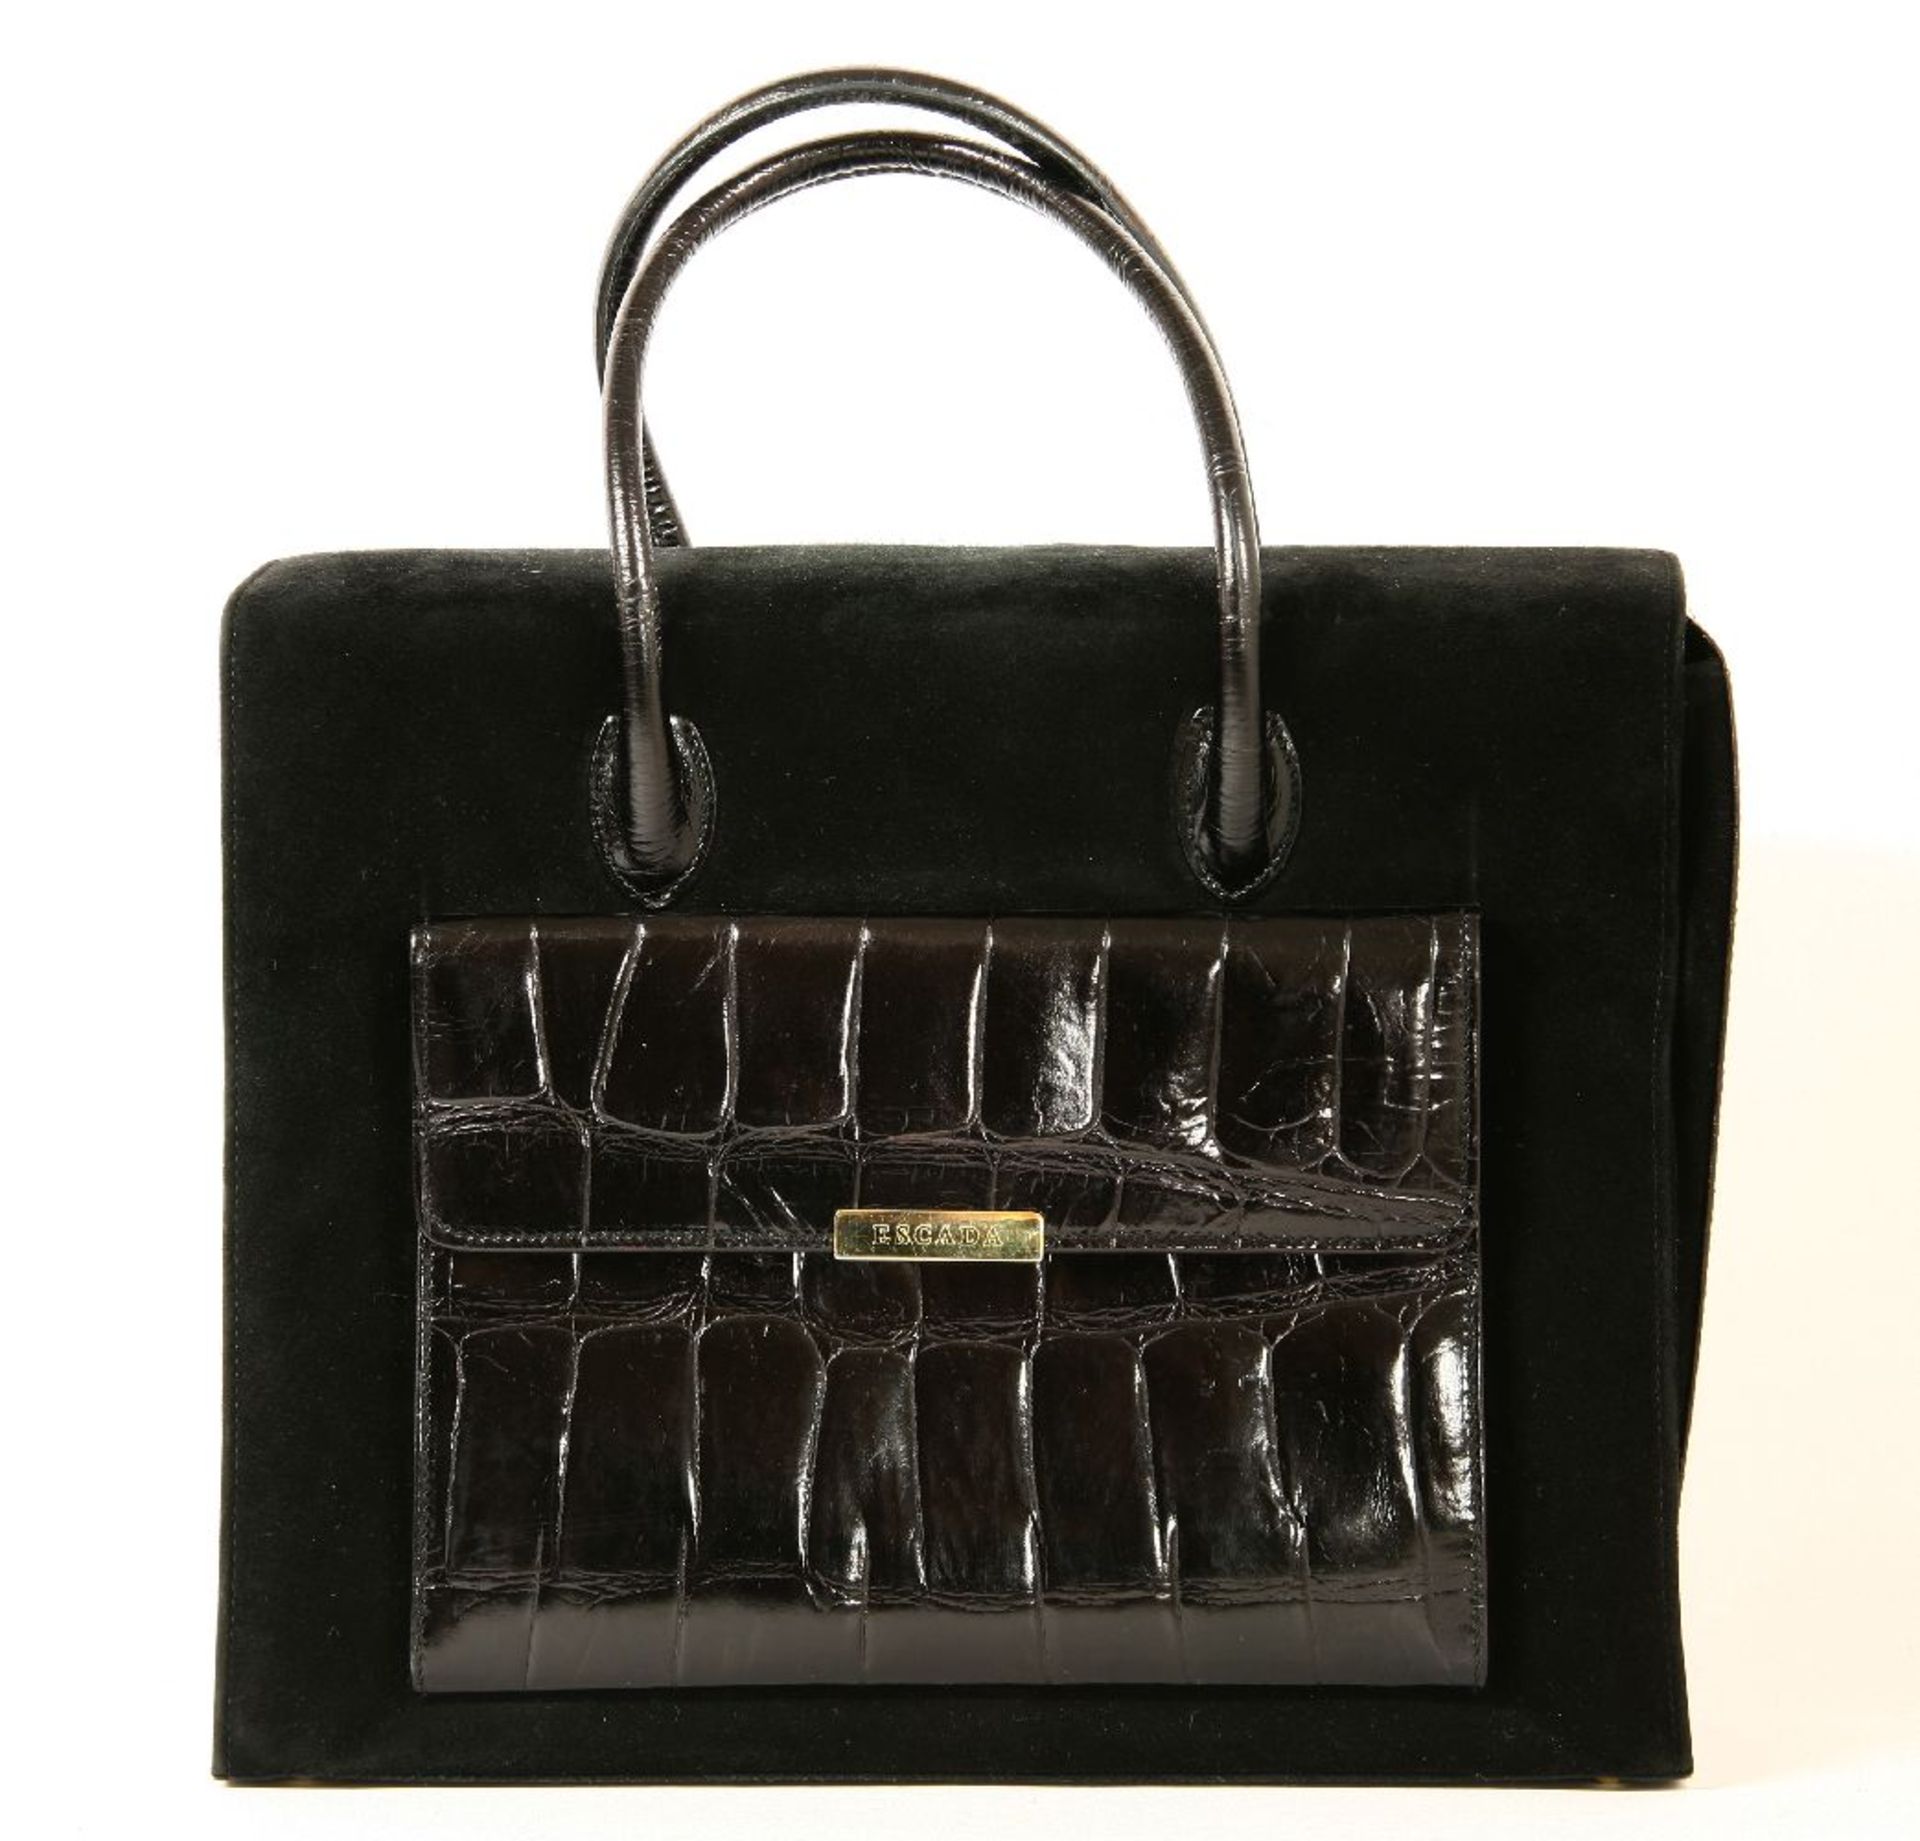 An Escada black suede handbag,of rectangular form, with a crocodile embossed leather pocket with